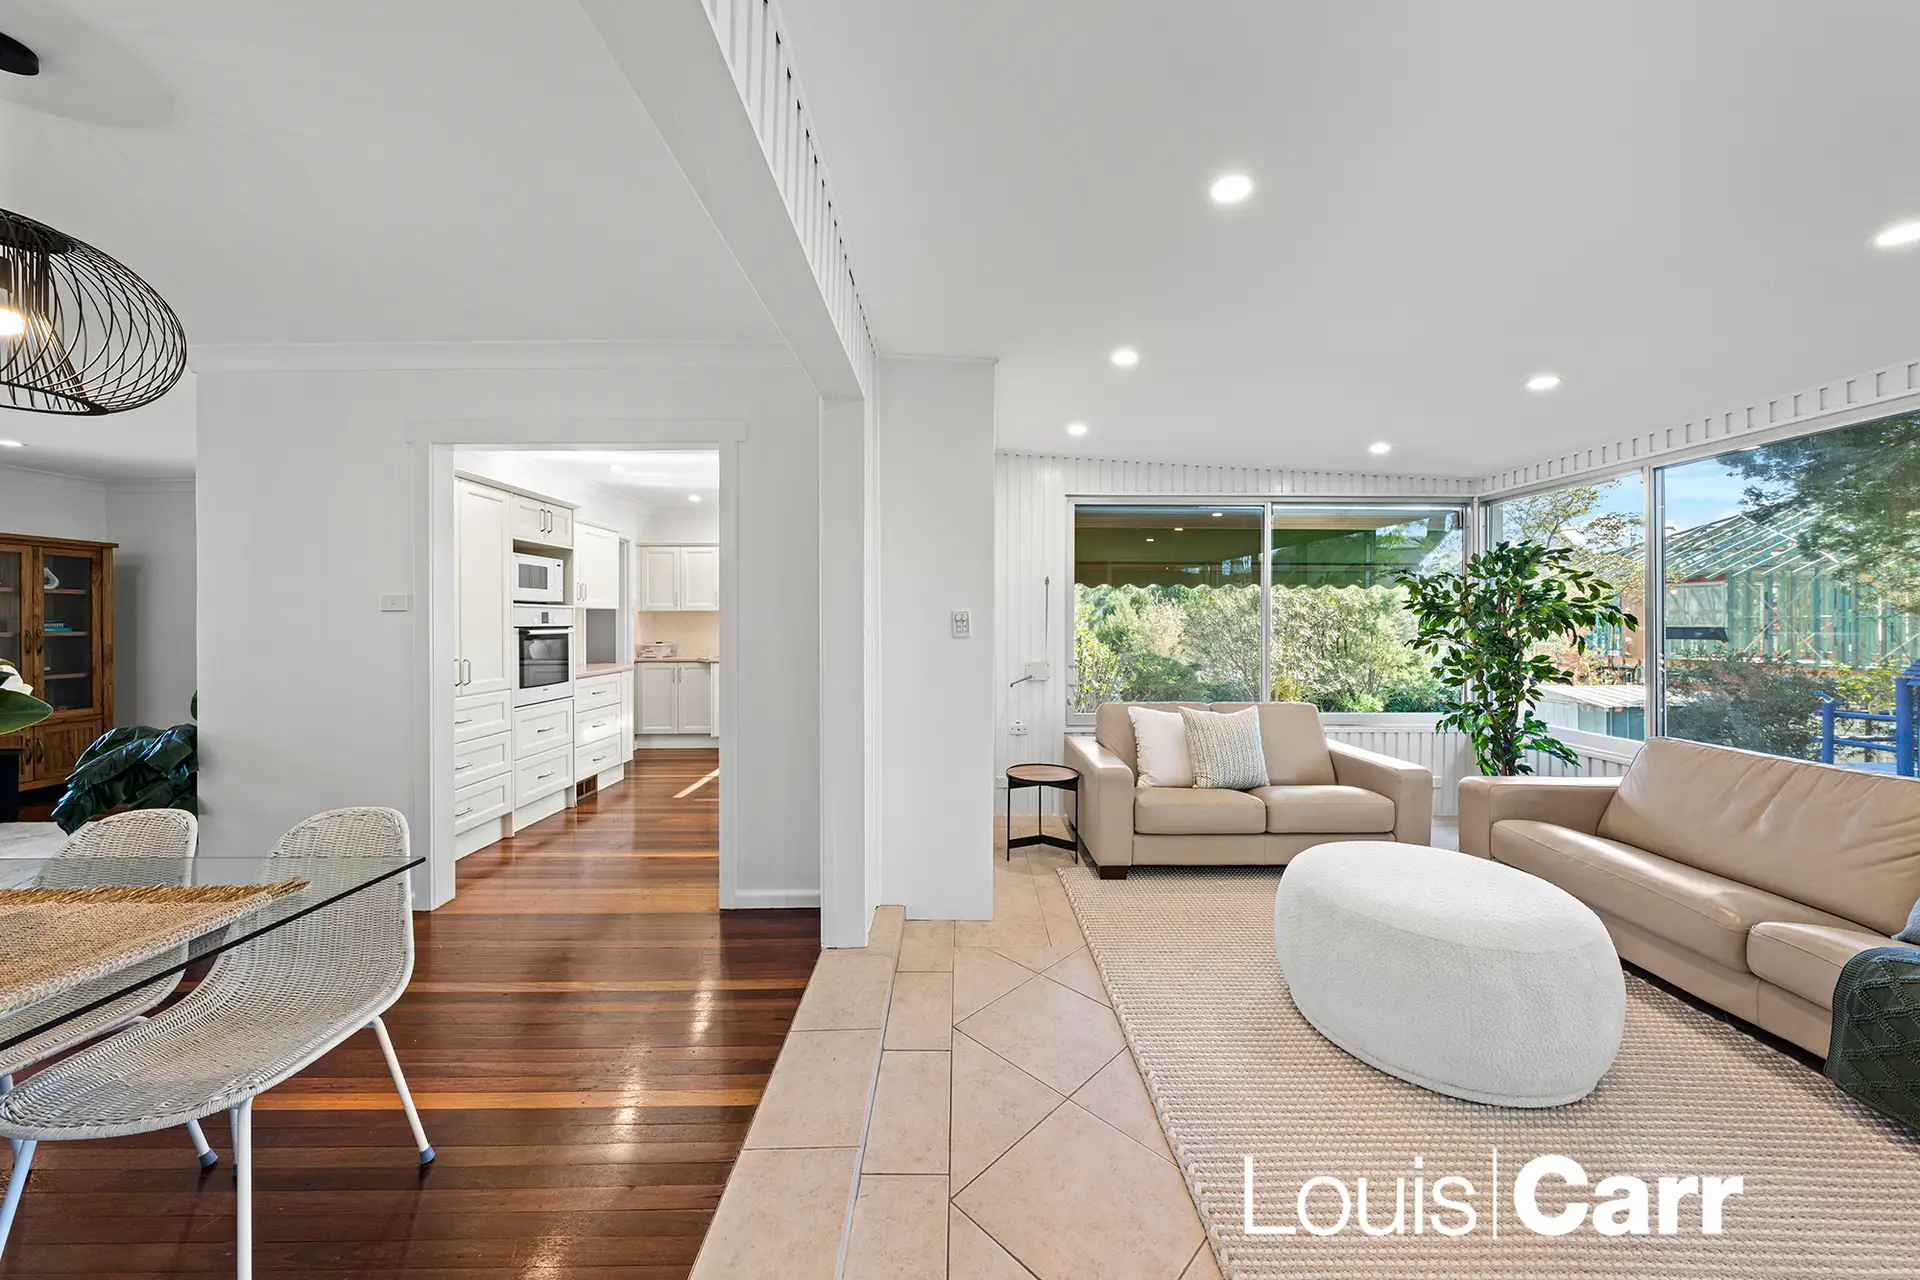 Photo #8: 4 Valda Street, West Pennant Hills - Sold by Louis Carr Real Estate